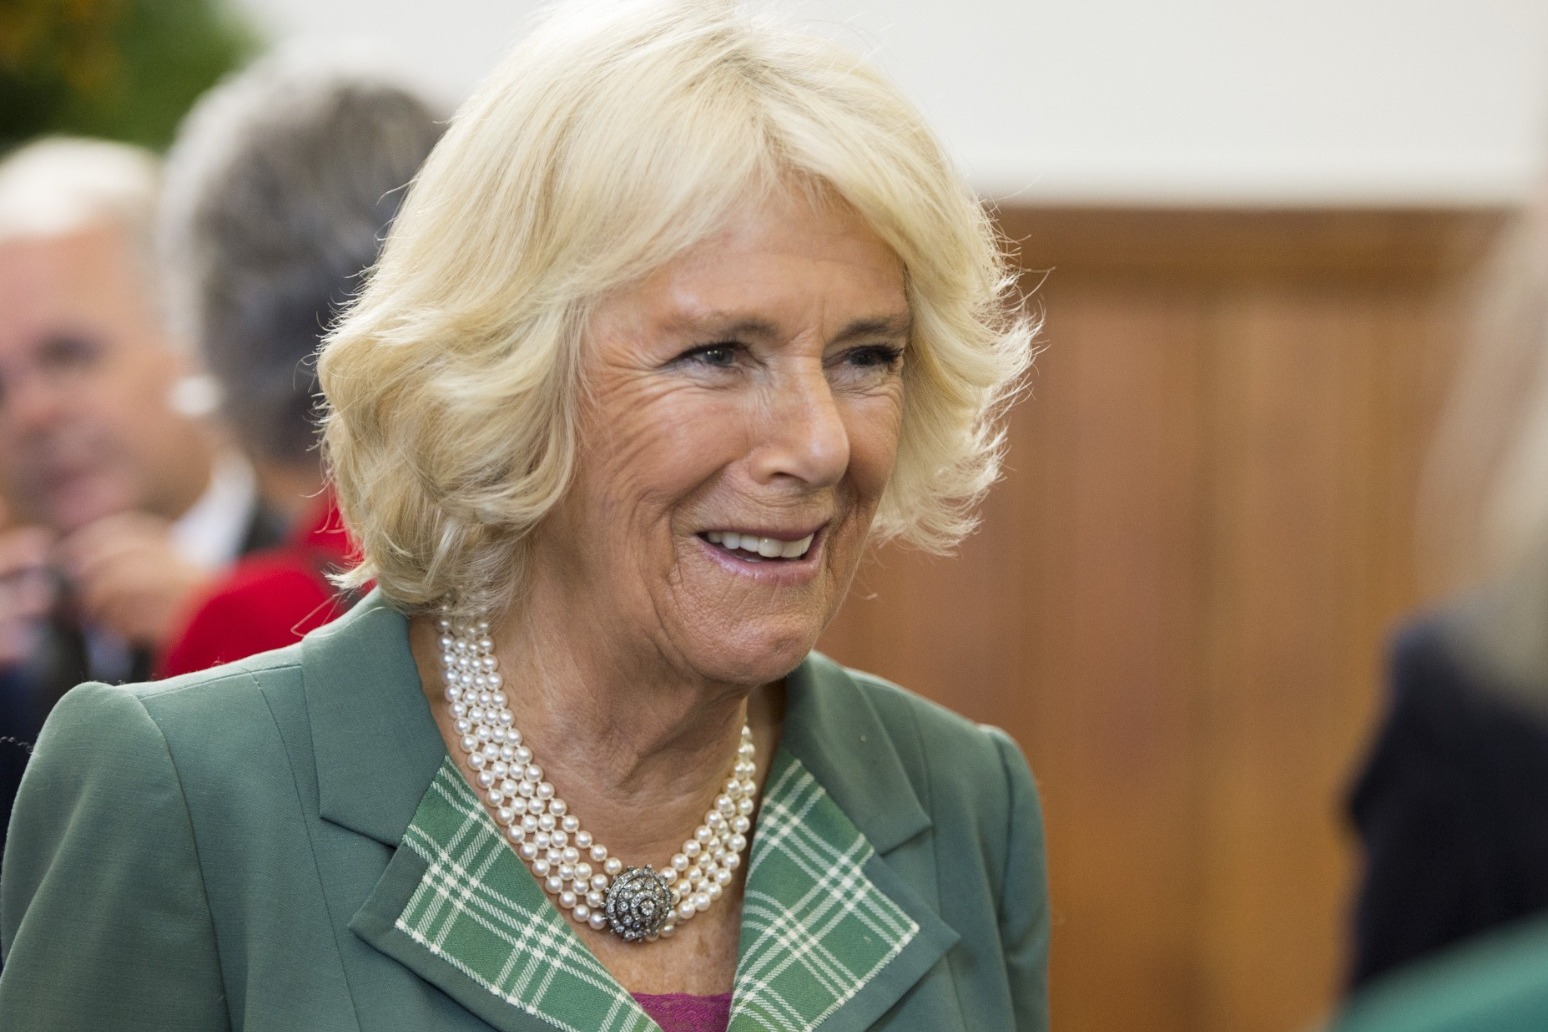 Camilla’s tribute to the Queen: I will always remember her smile 